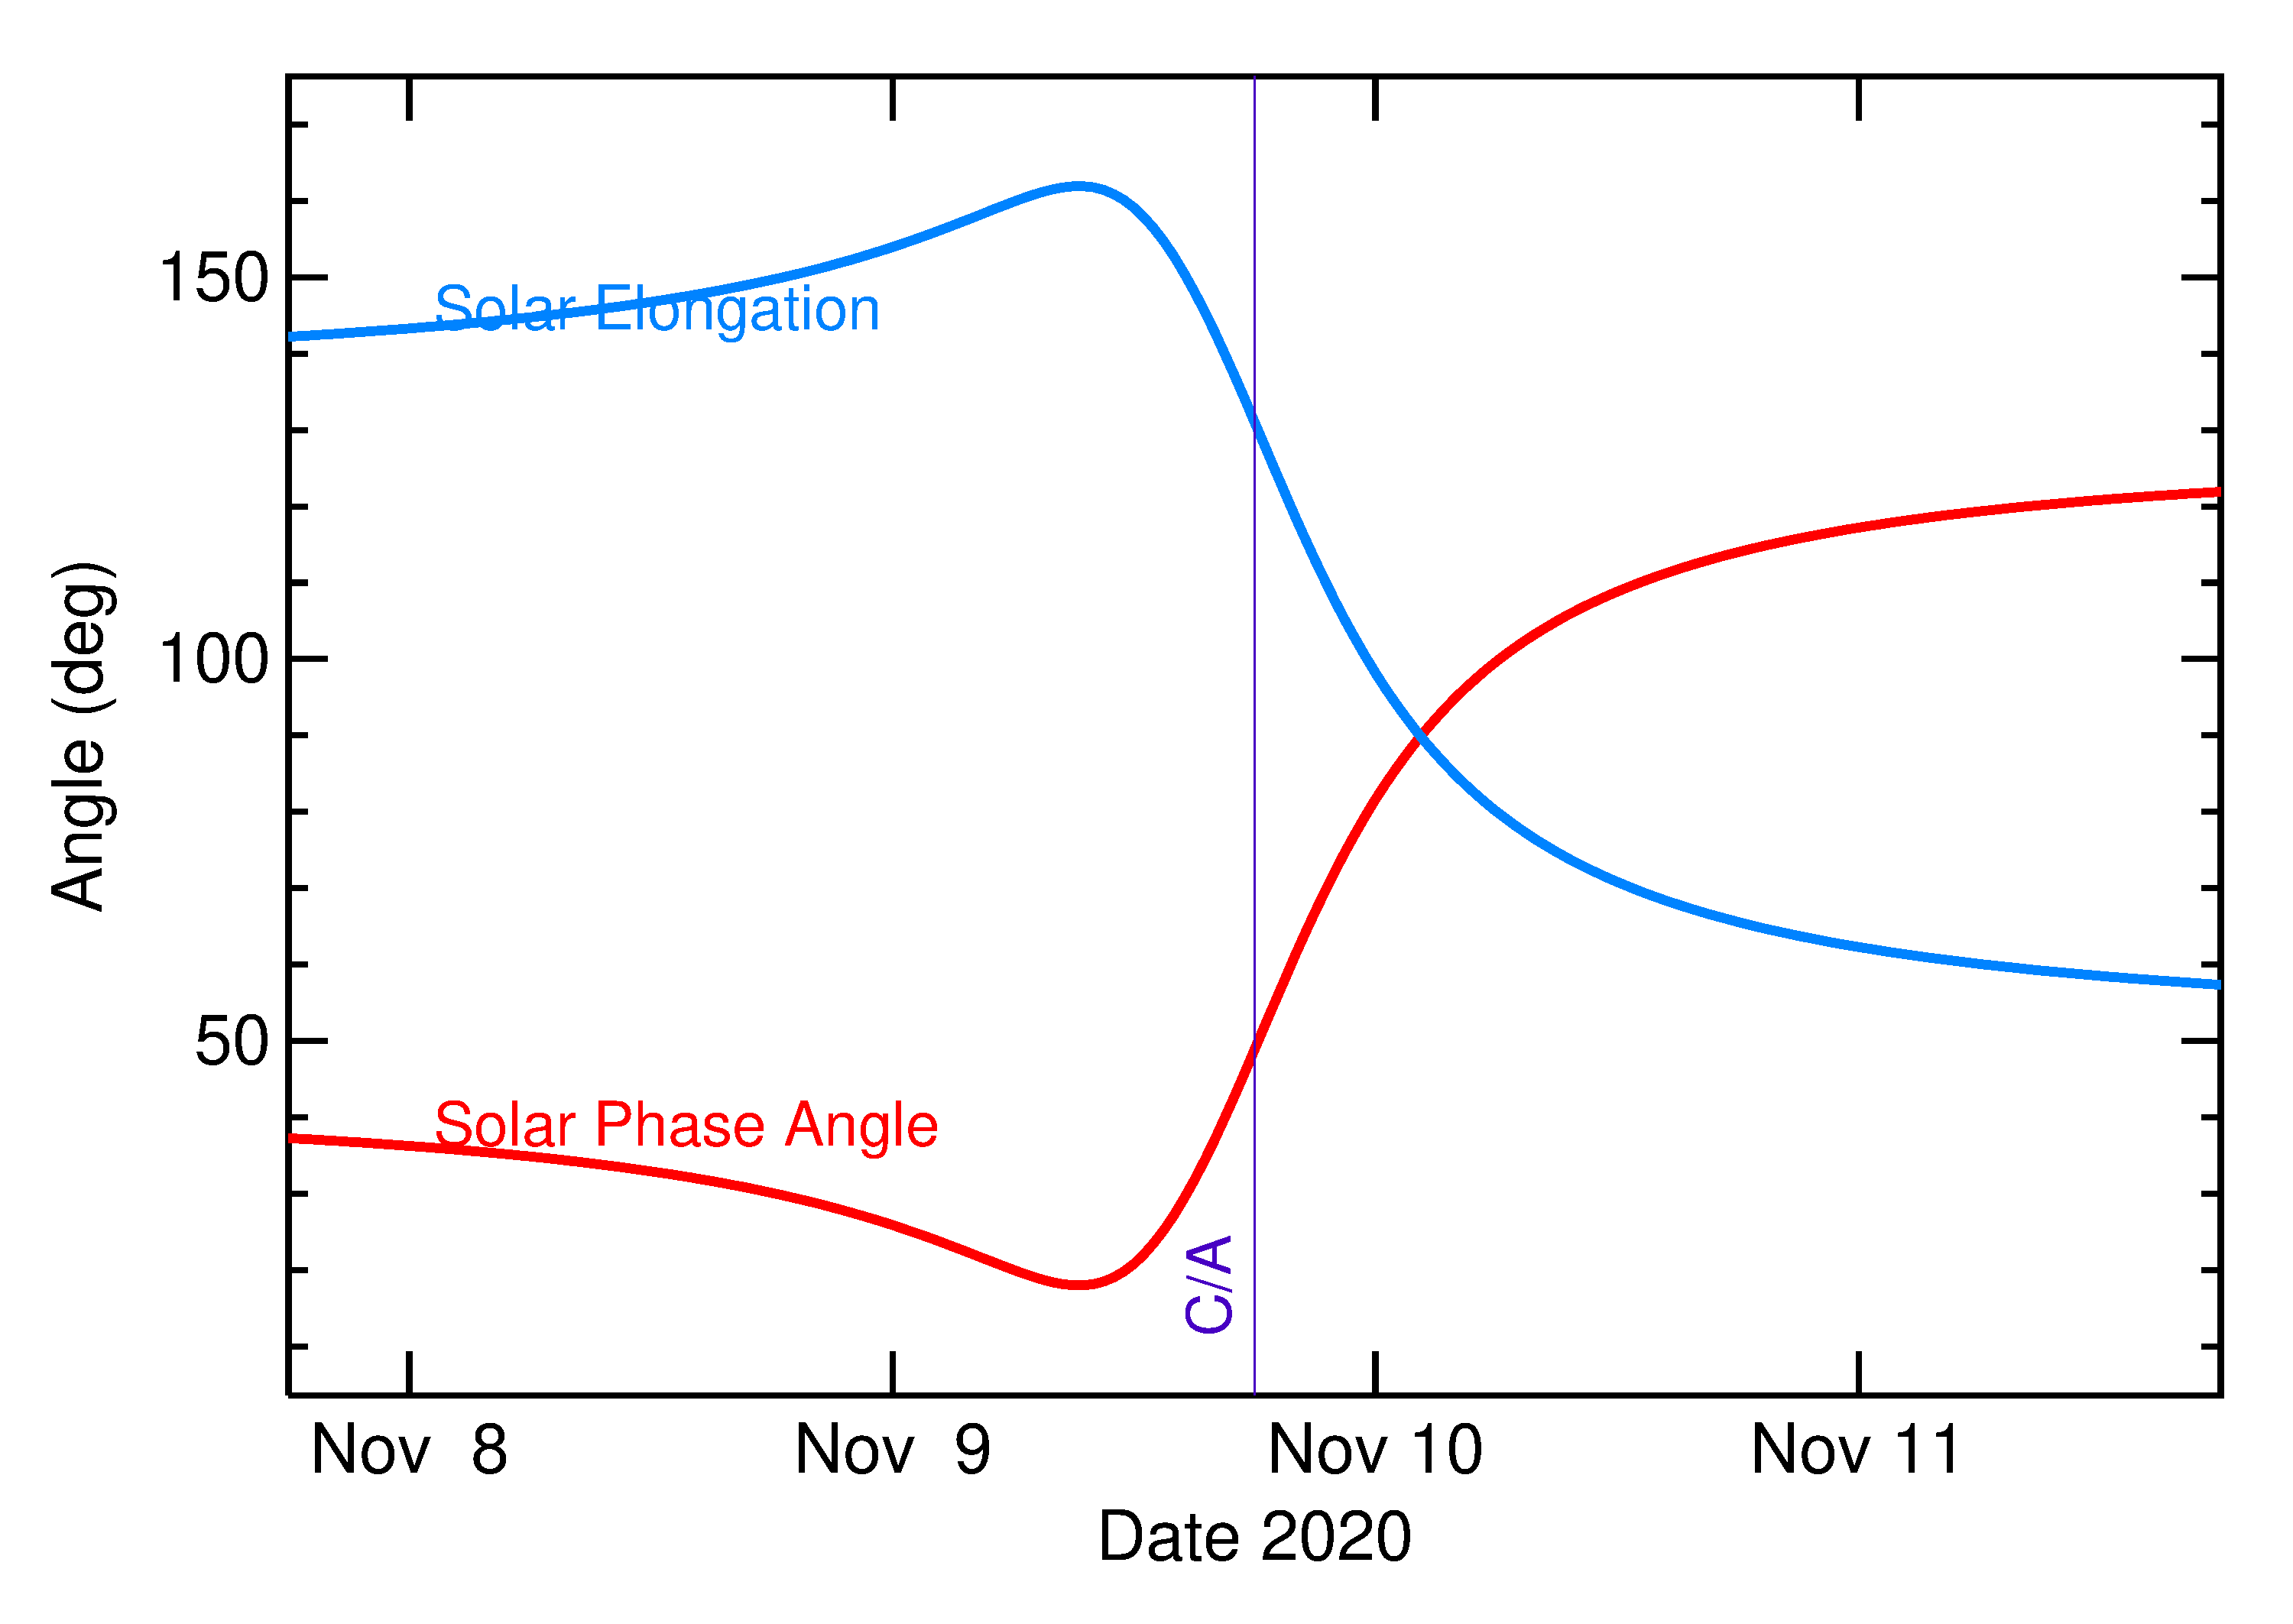 Solar Elongation and Solar Phase Angle of 2020 VR1 in the days around closest approach